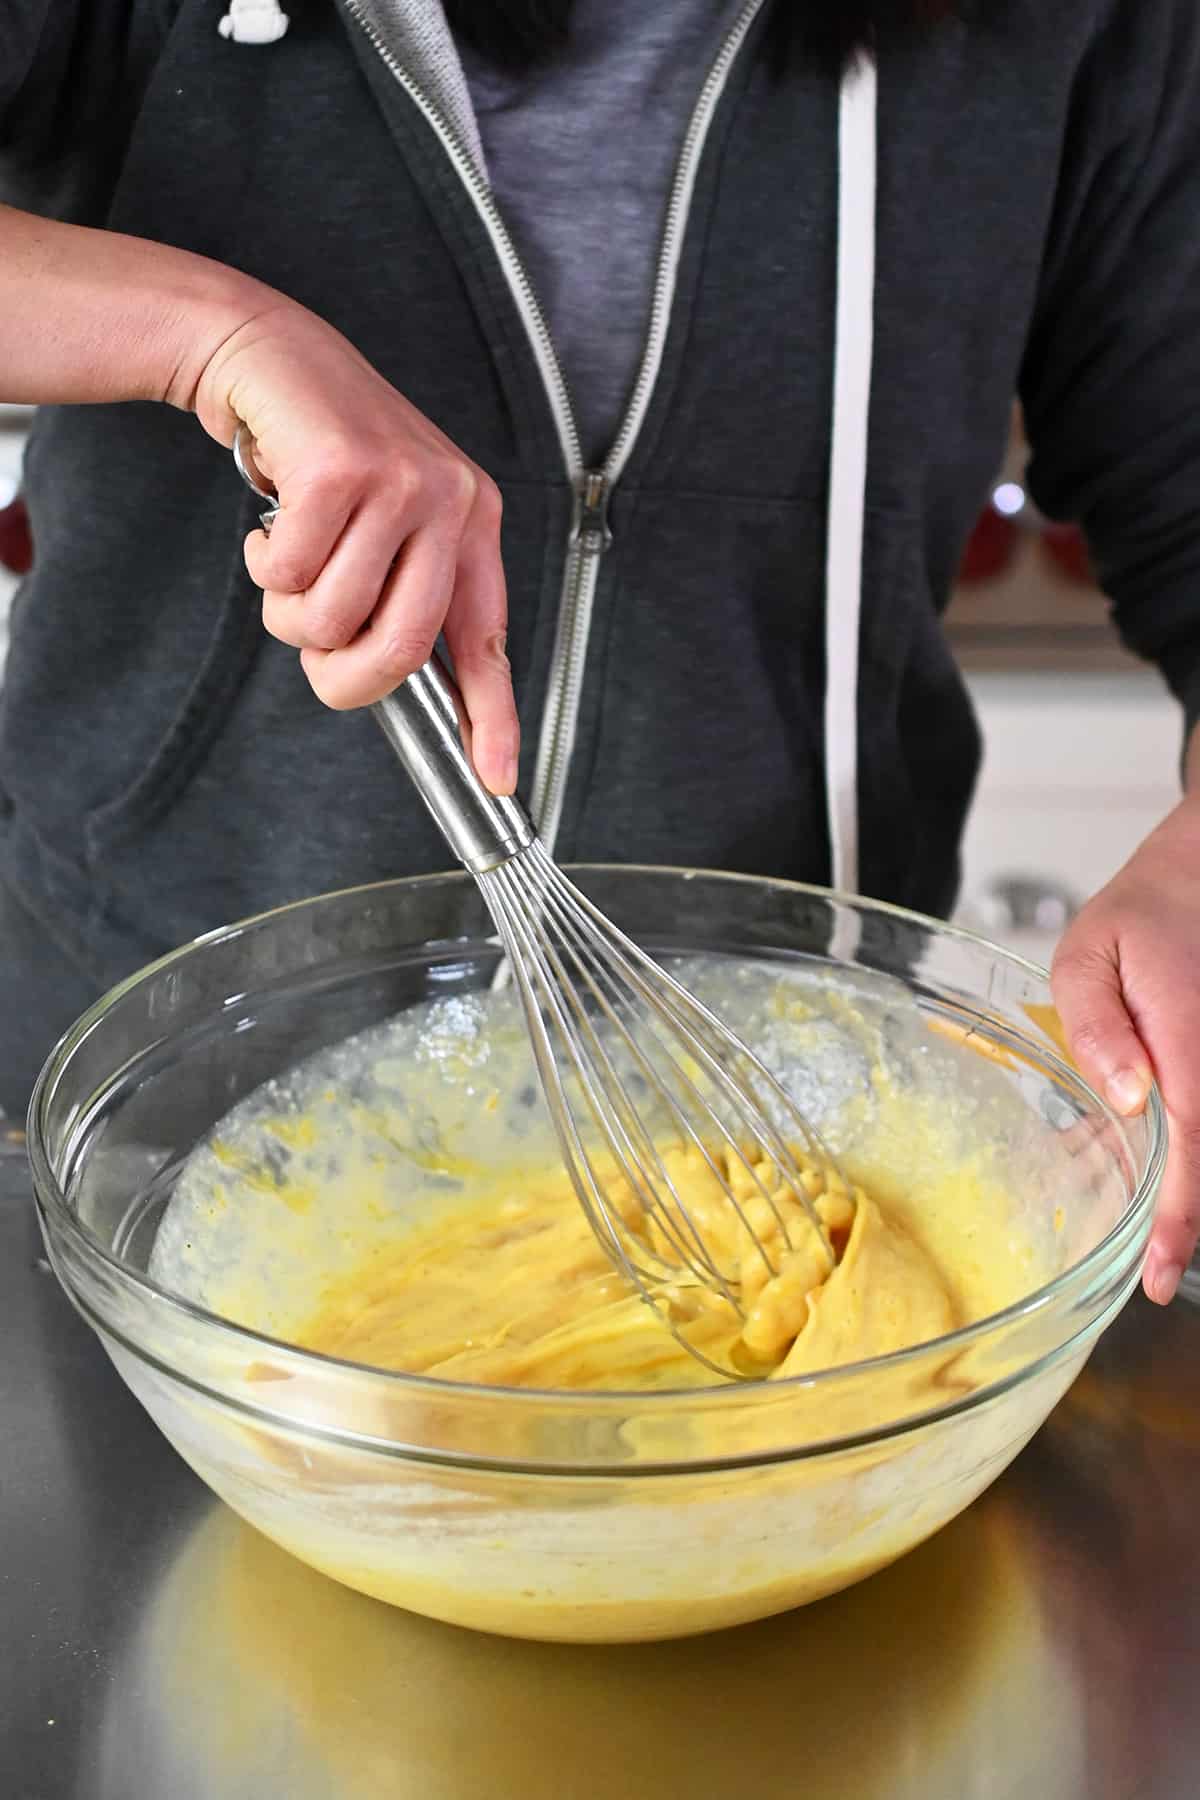 Whisking the dairy-free and paleo quiche filling in a large mixing bowl.